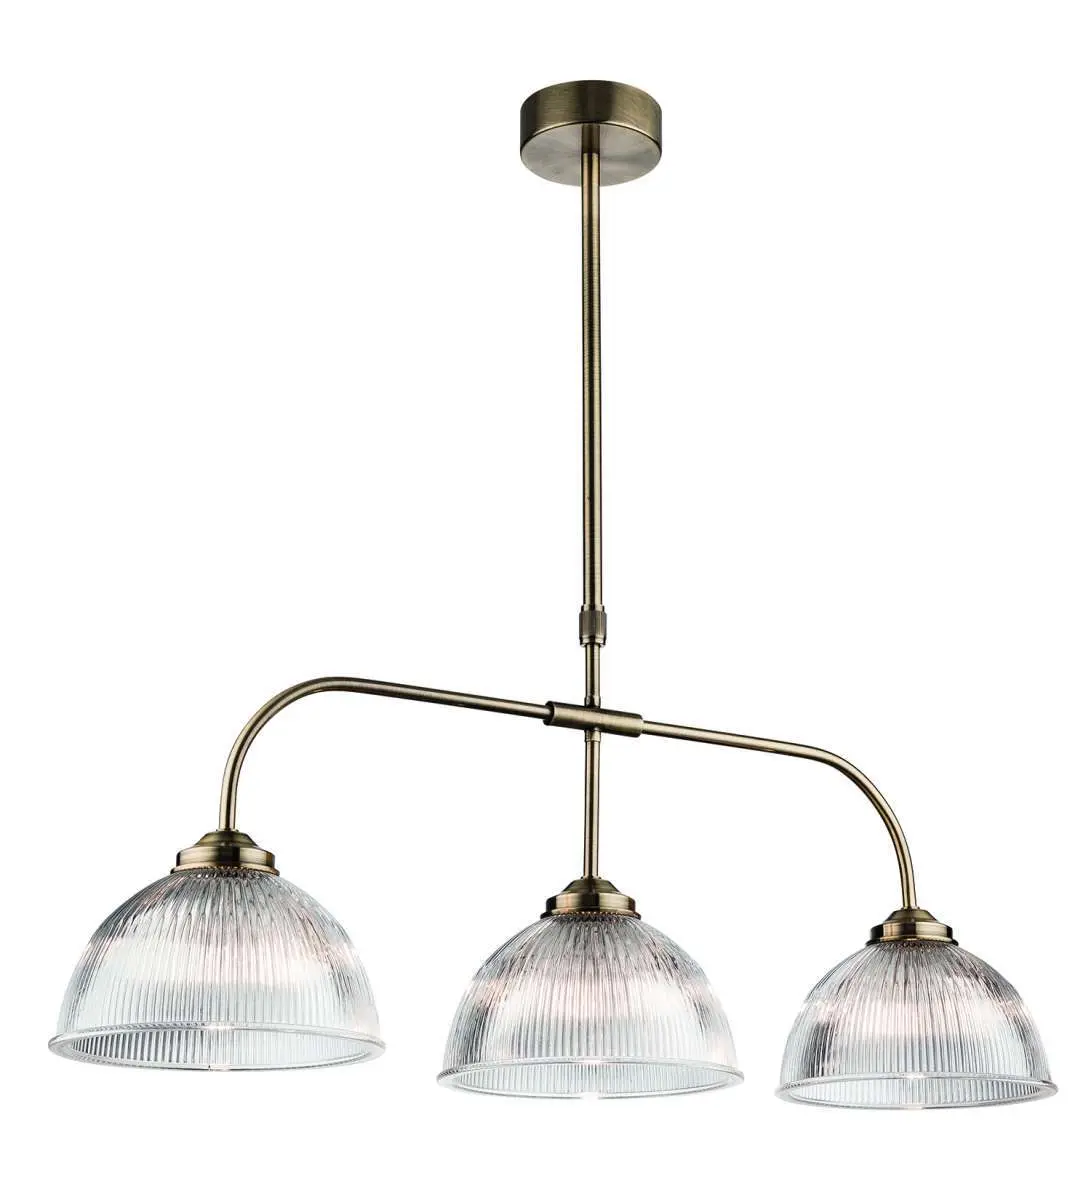 Ashford 3 Light Billiard Fitting in Antique Brass with Ribbed Glass